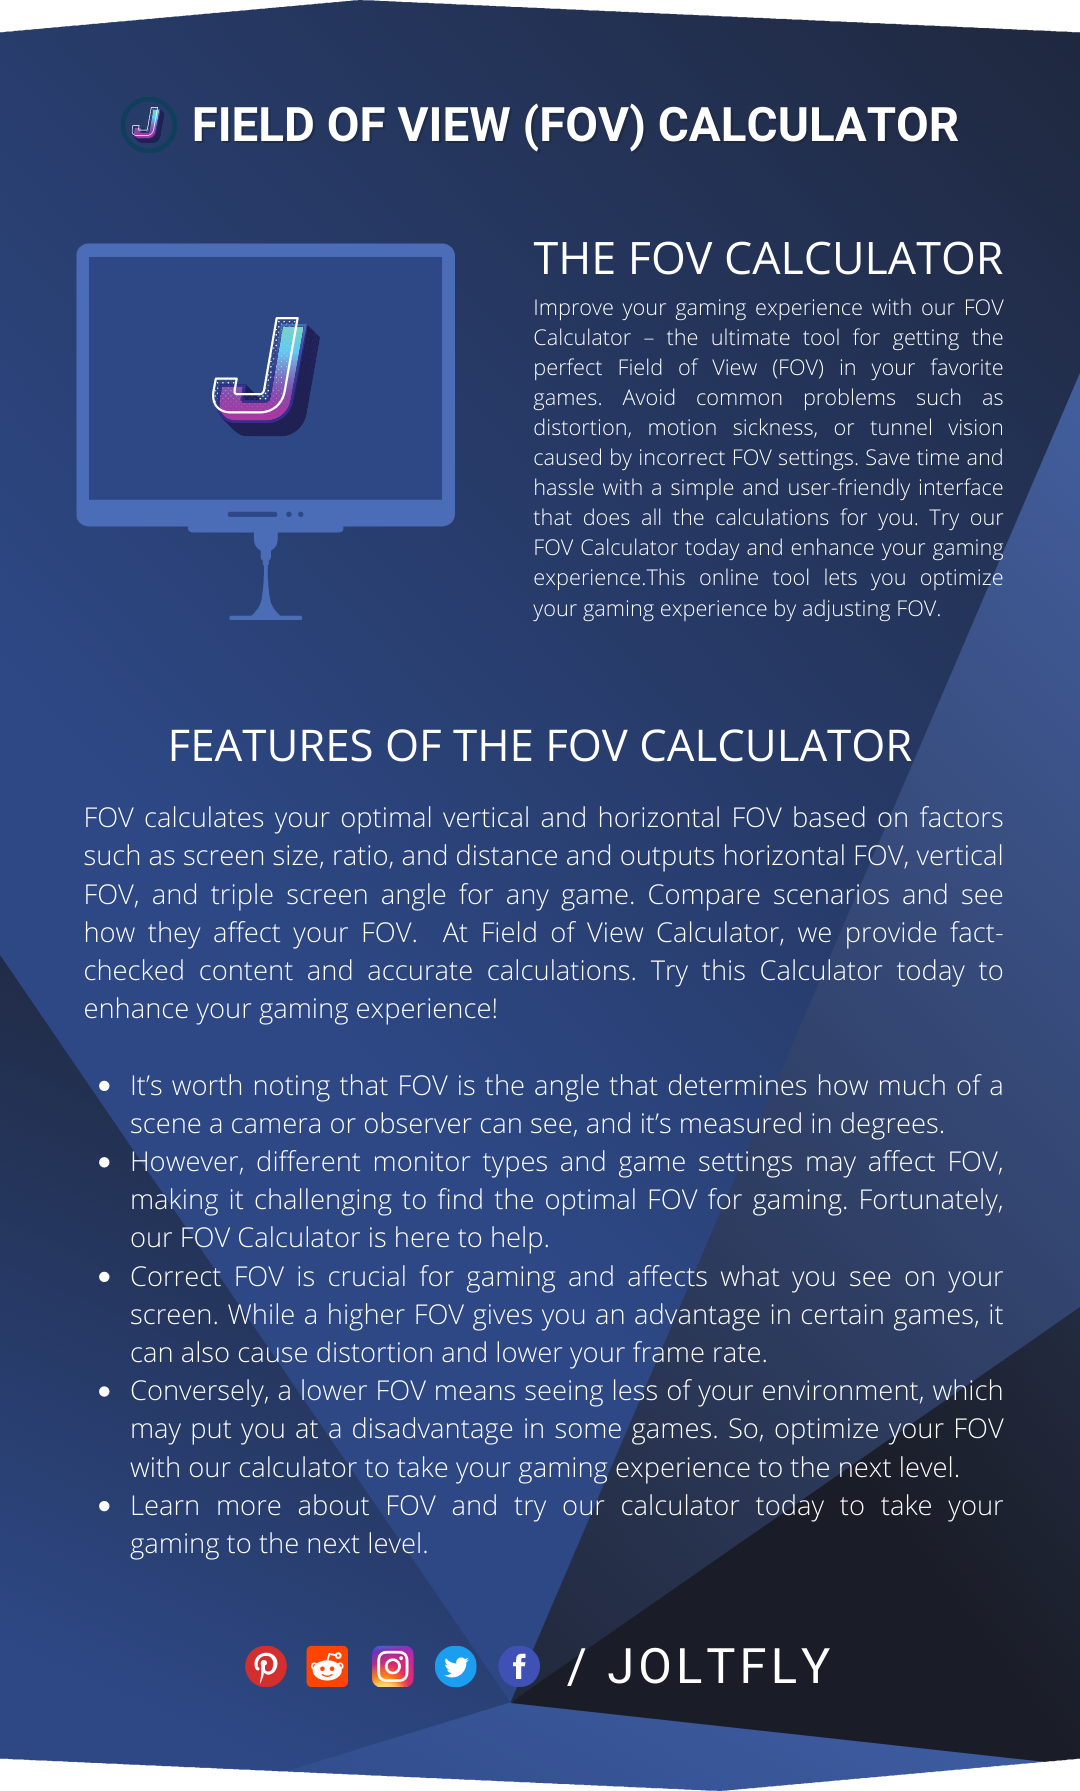 Field of View (FOV) Calculator-Features